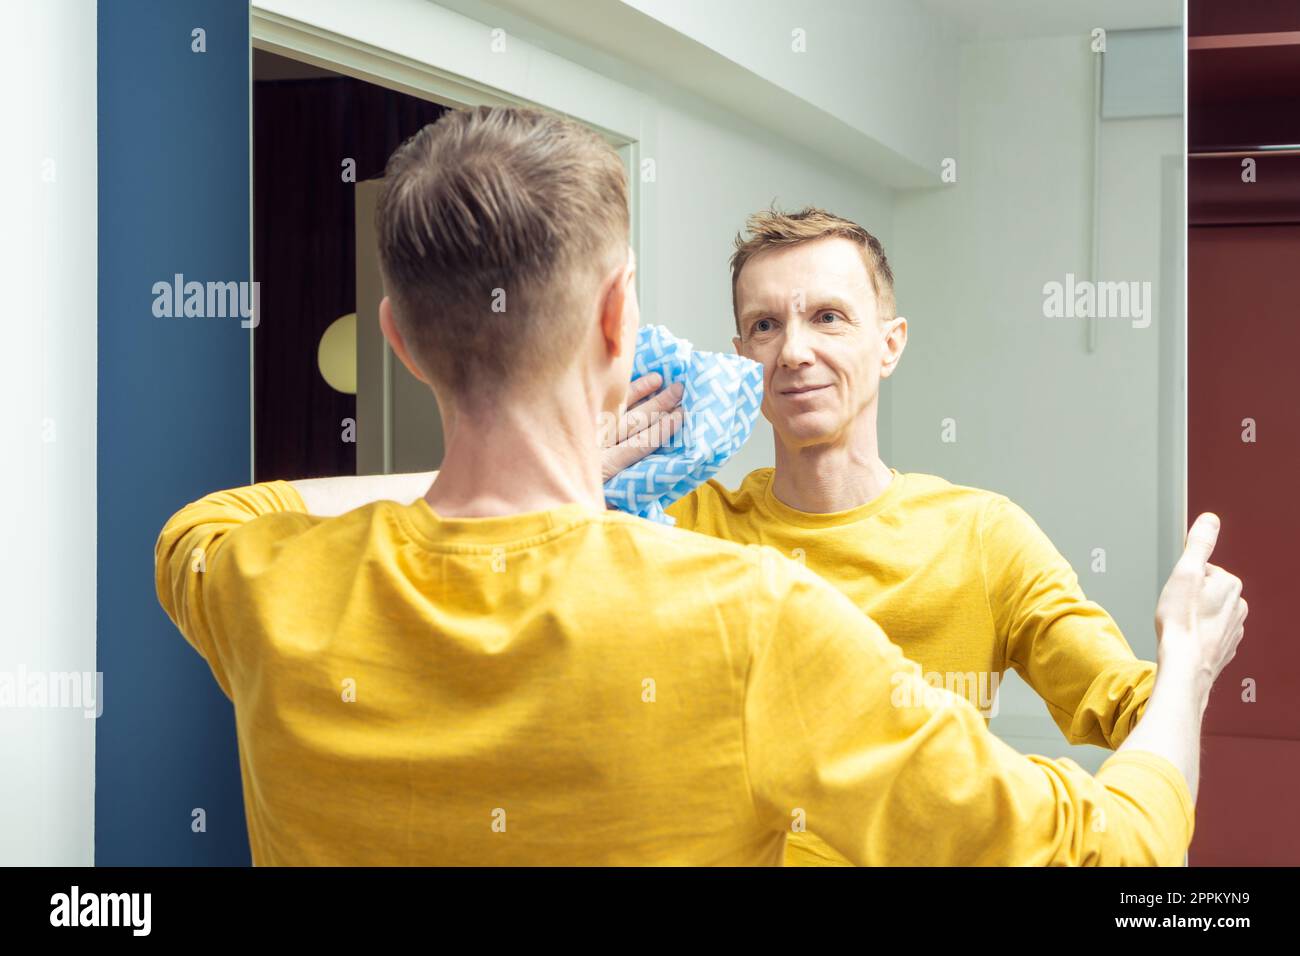 Happy adult man wiping mirror of sliding wardrobe door with dry rag, back view. Polish mirror with household cloth. Stock Photo